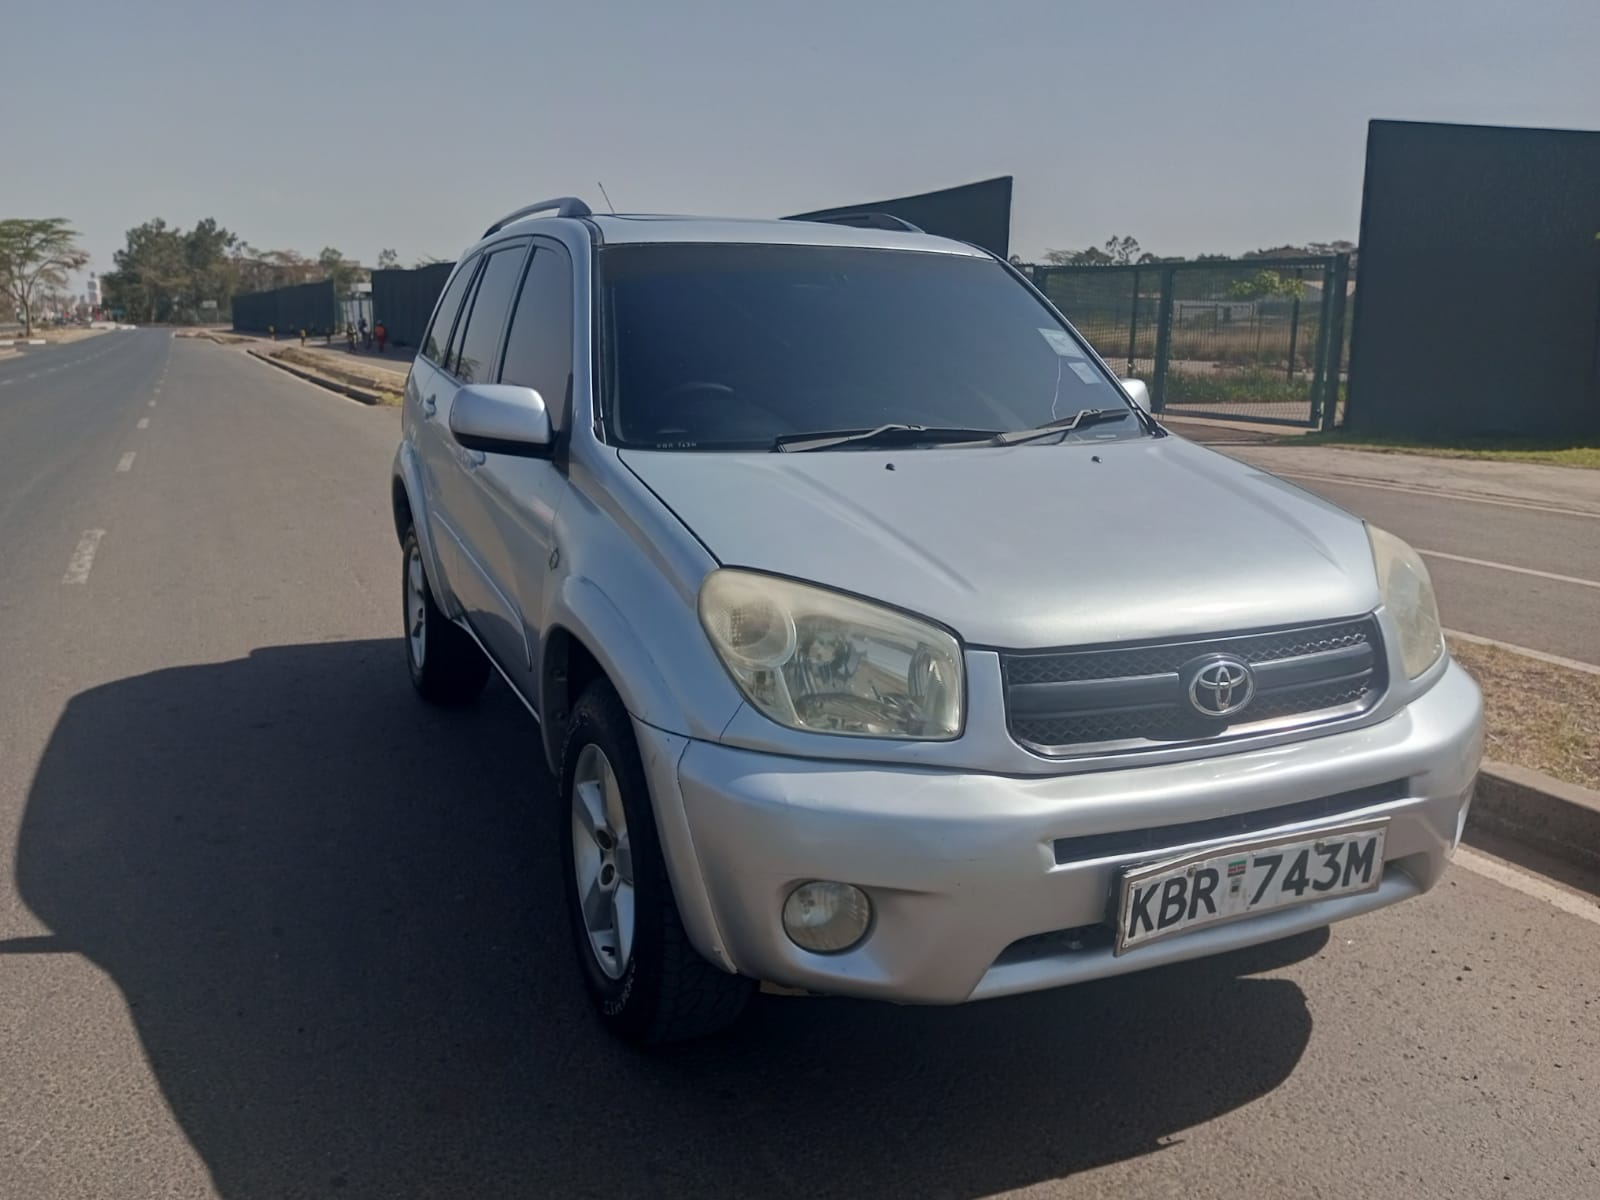 Toyota RAV4 SUNROOF QUICK SALE You Pay 30% DEPOSIT Trade in OK